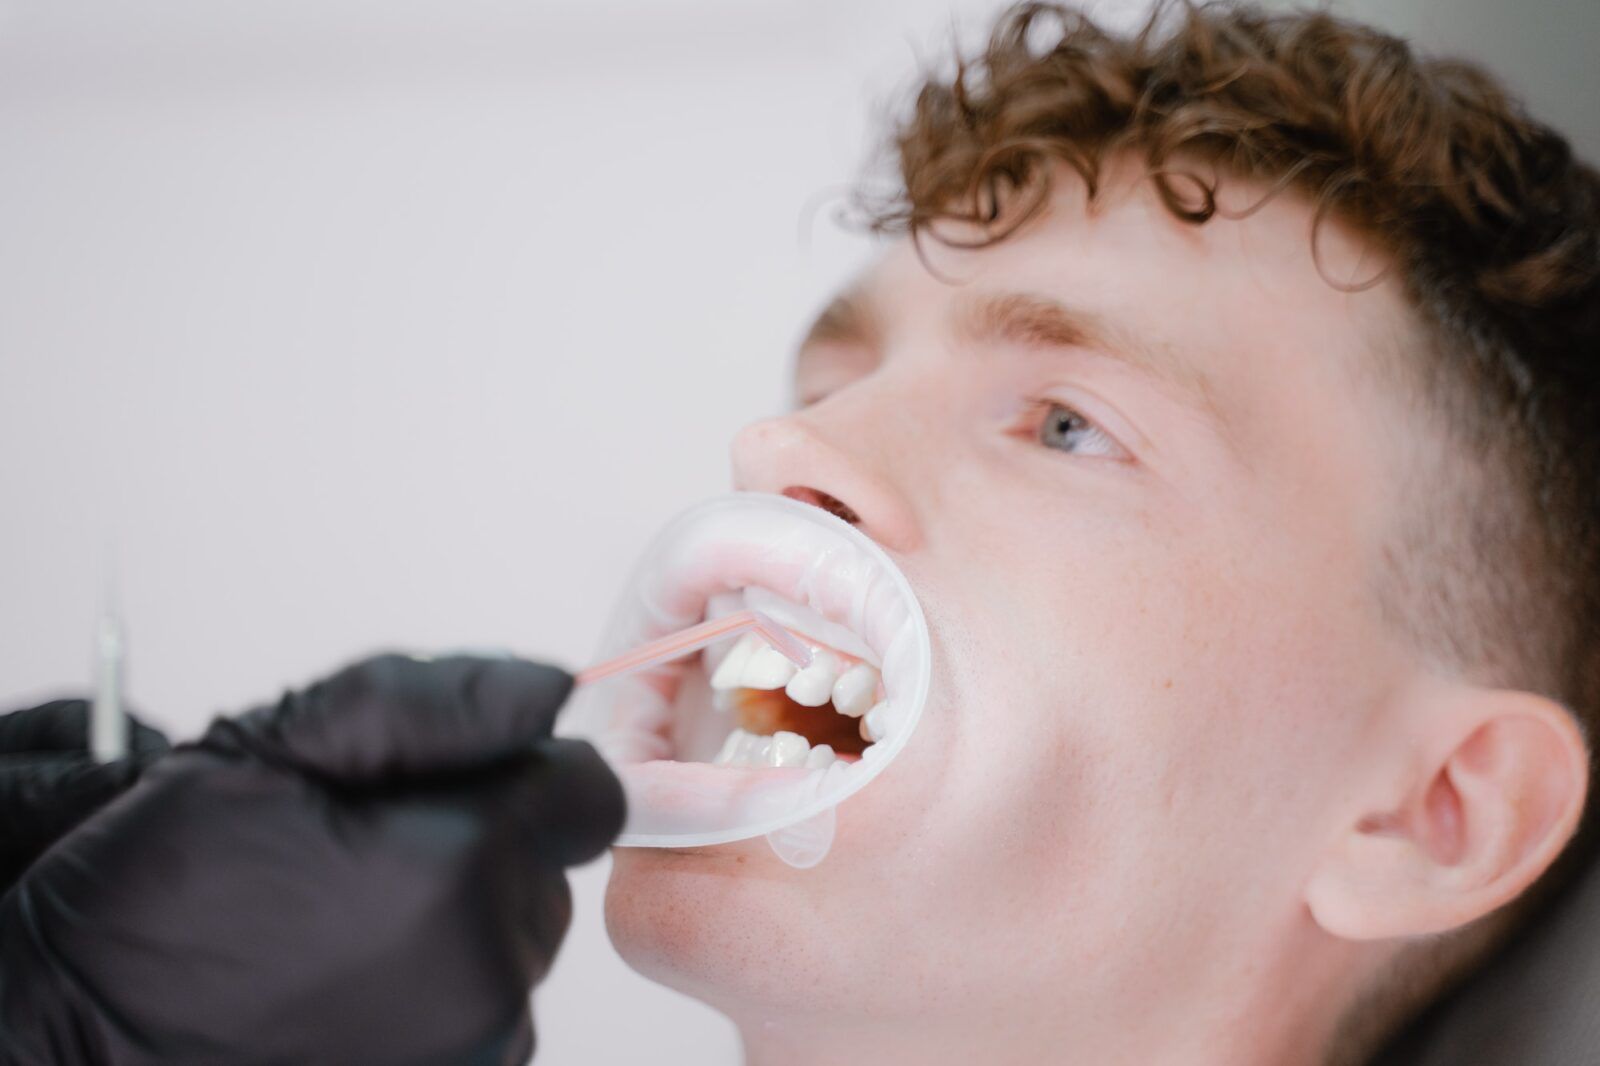 The hygienist doctor washes off the whitening solution from the teeth